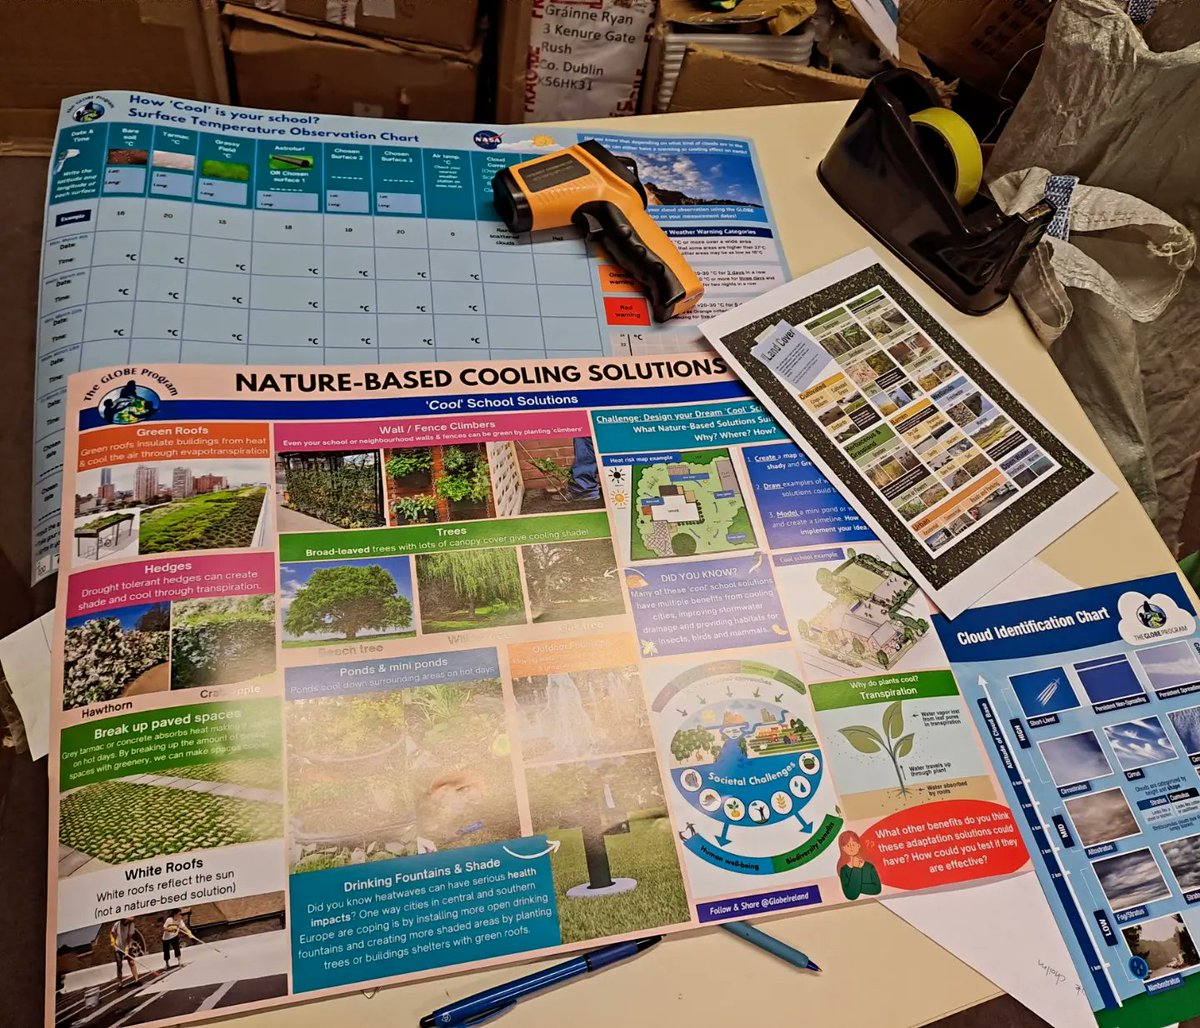 🙌We're ready with another earth science #climateresilience at school project

🌏30 lucky schools are receiving their 'How Cool is Your School? Surface Temperature, Land Cover, and #heatwave  Resilience Activity packs this week to start their March Observations
#climateliteracy